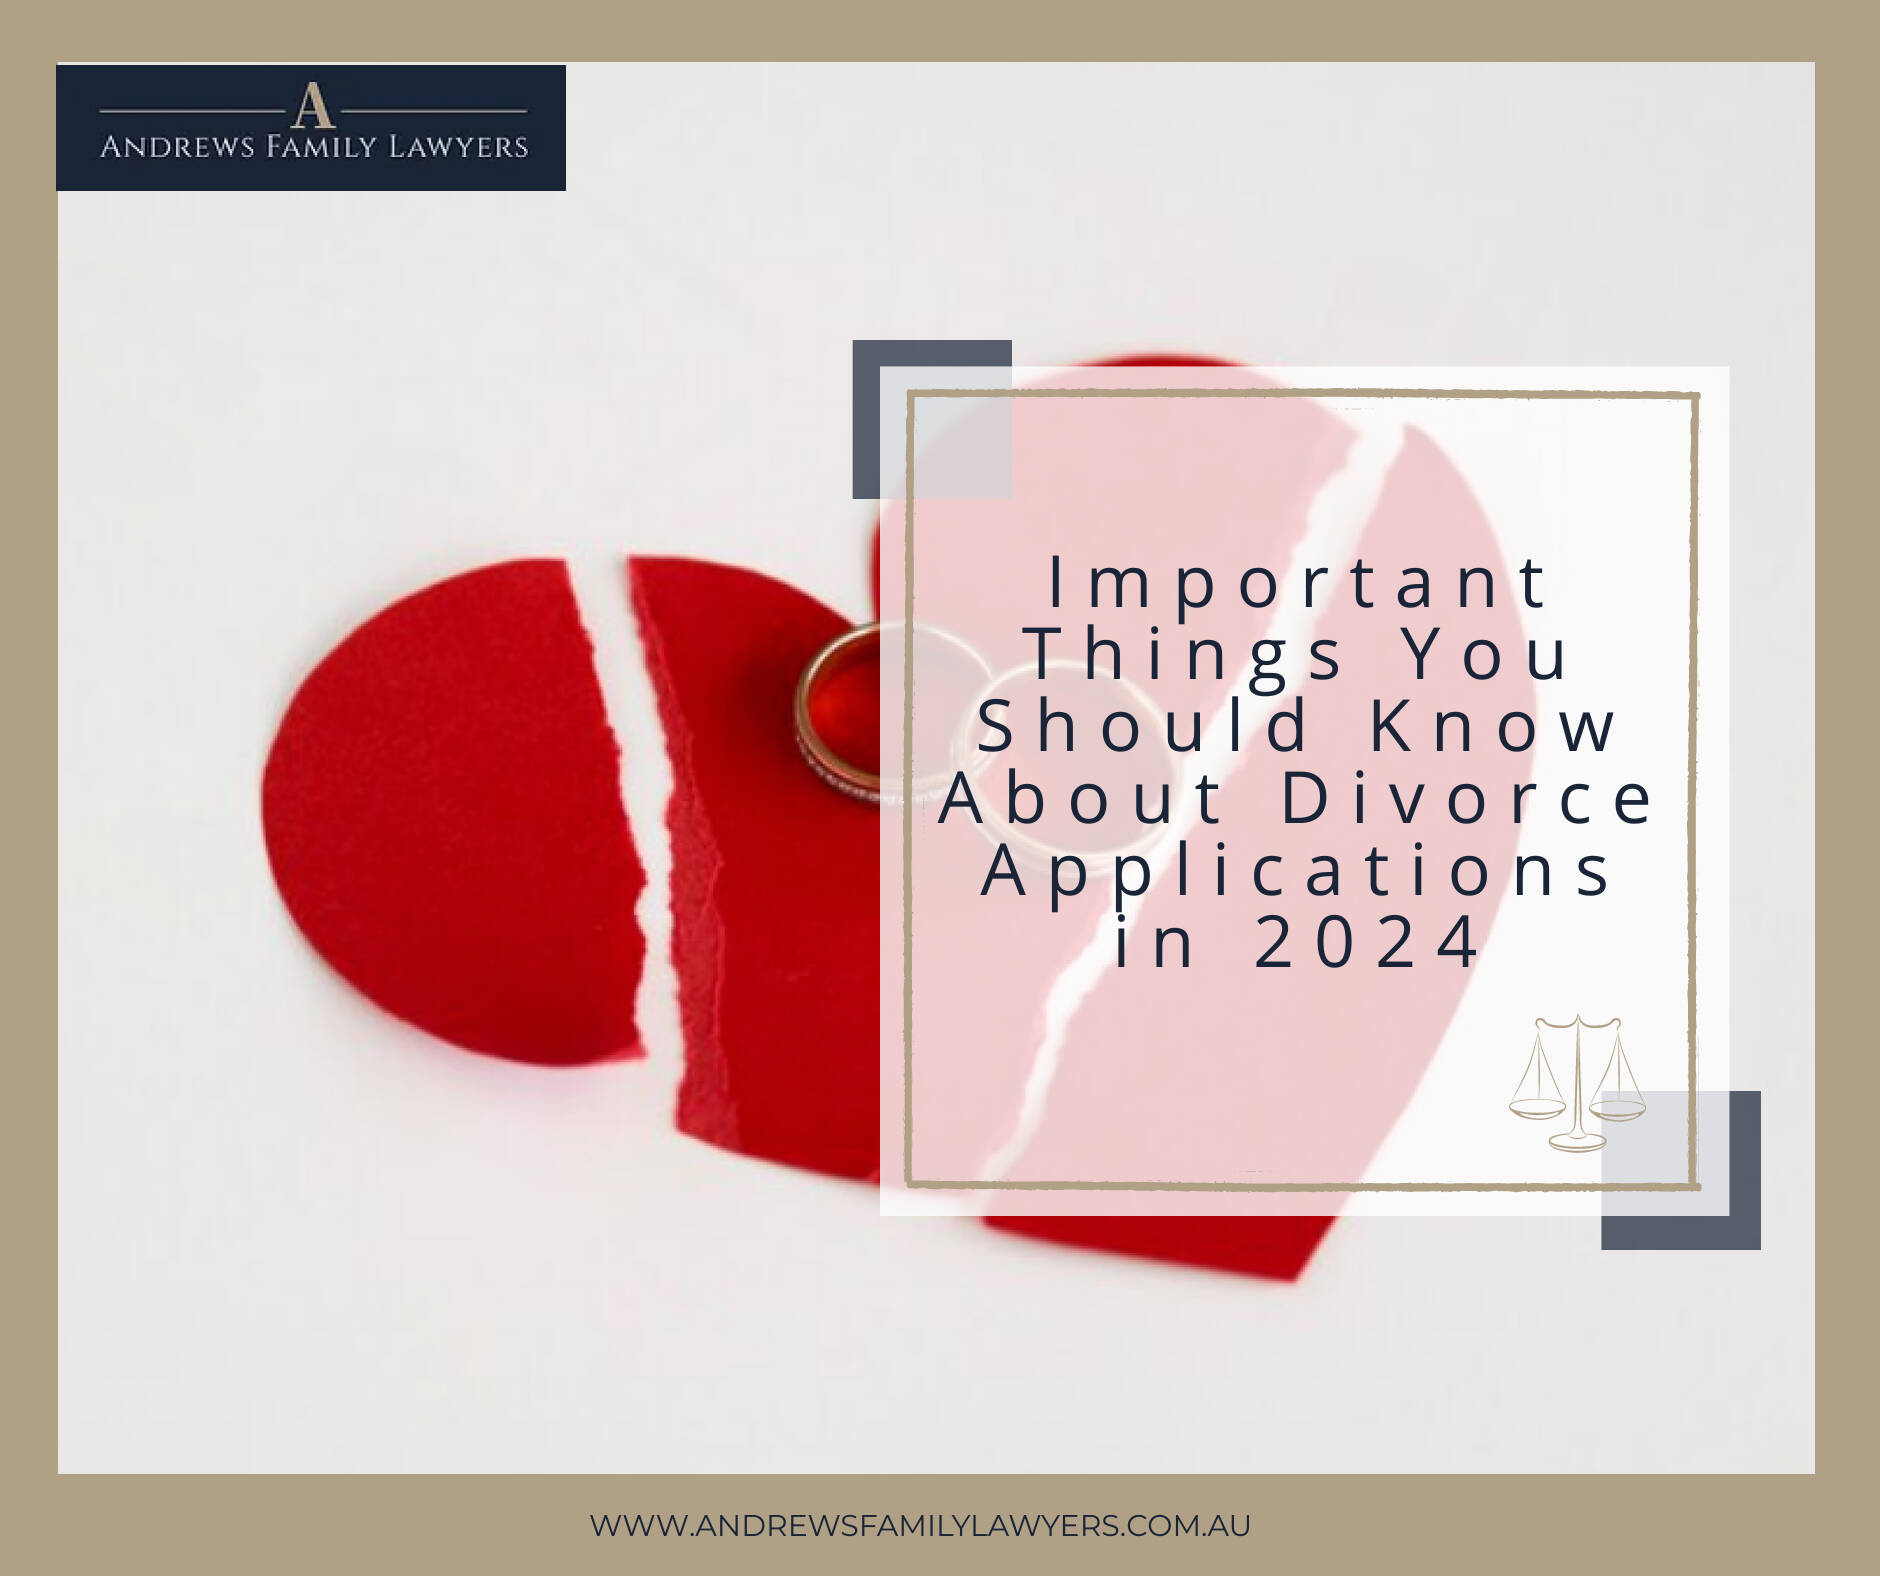 Important Things You Should Know About Divorce Applications in 2024